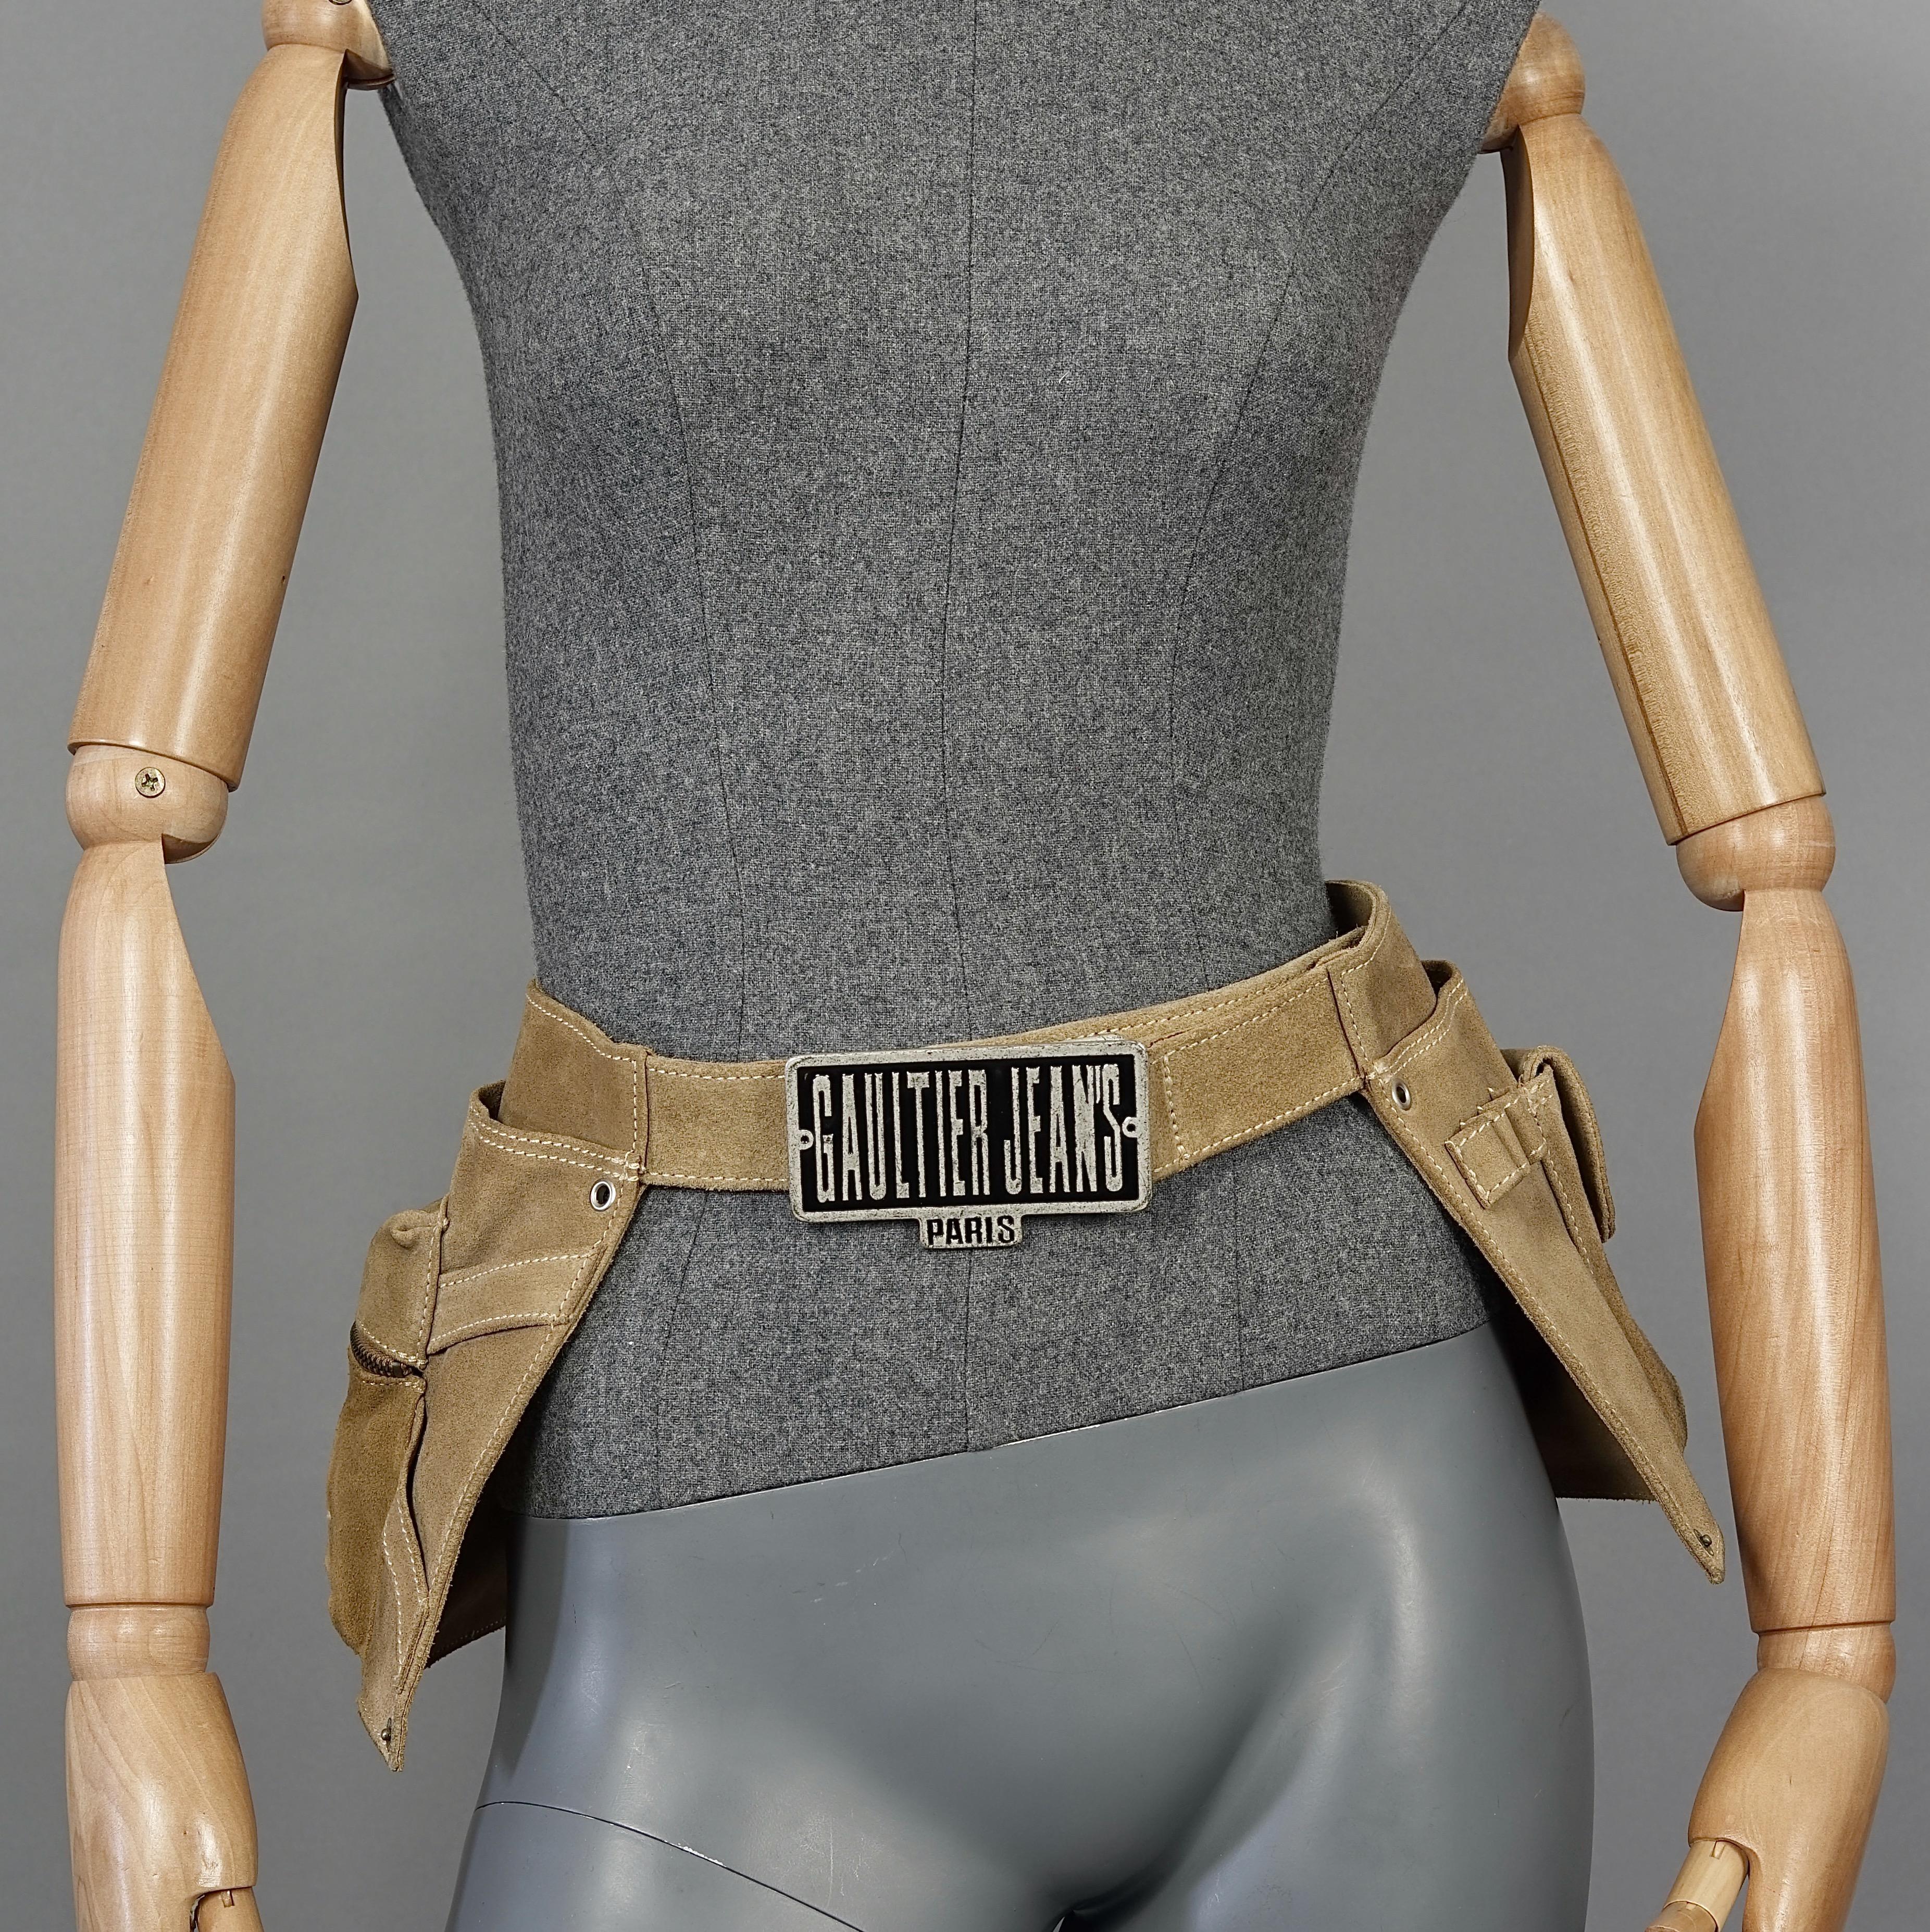 Vintage JEAN PAUL GAULTIER Utility Suede Leather Fanny Belt Bag

Measurements:
Height: 8.26 inches (21 cm)
Wearable Length: 28.74 inches to 35.82 inches (73 cm to 91 cm).

Features:
- 100% Authentic JEAN PAUL GAULTIER.
- Brown suede leather utility